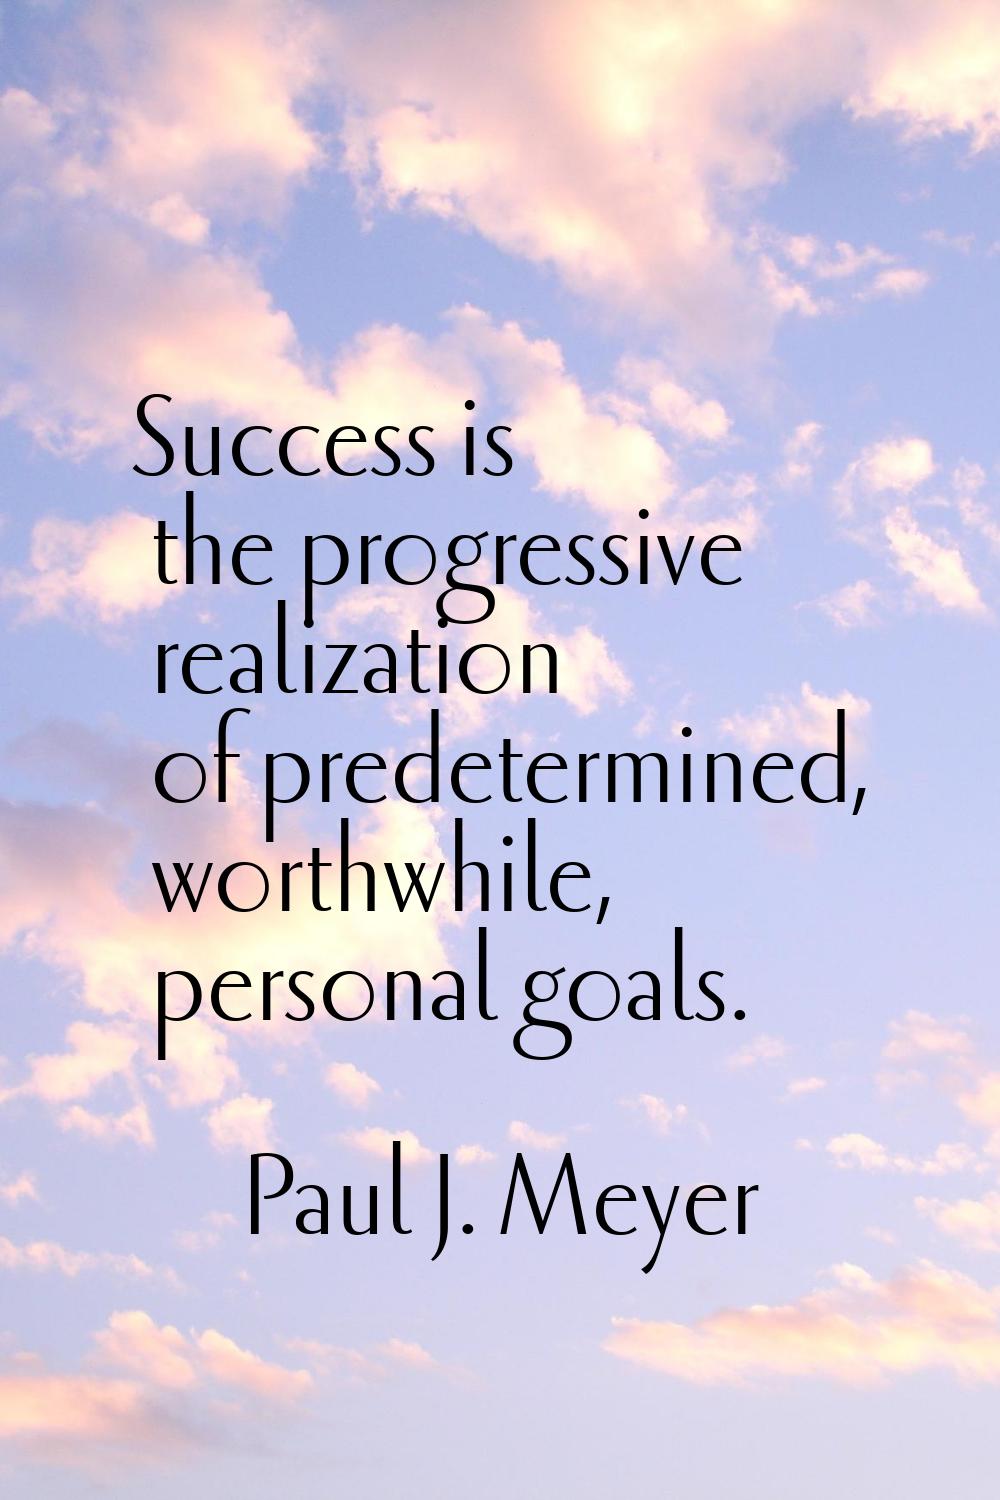 Success is the progressive realization of predetermined, worthwhile, personal goals.